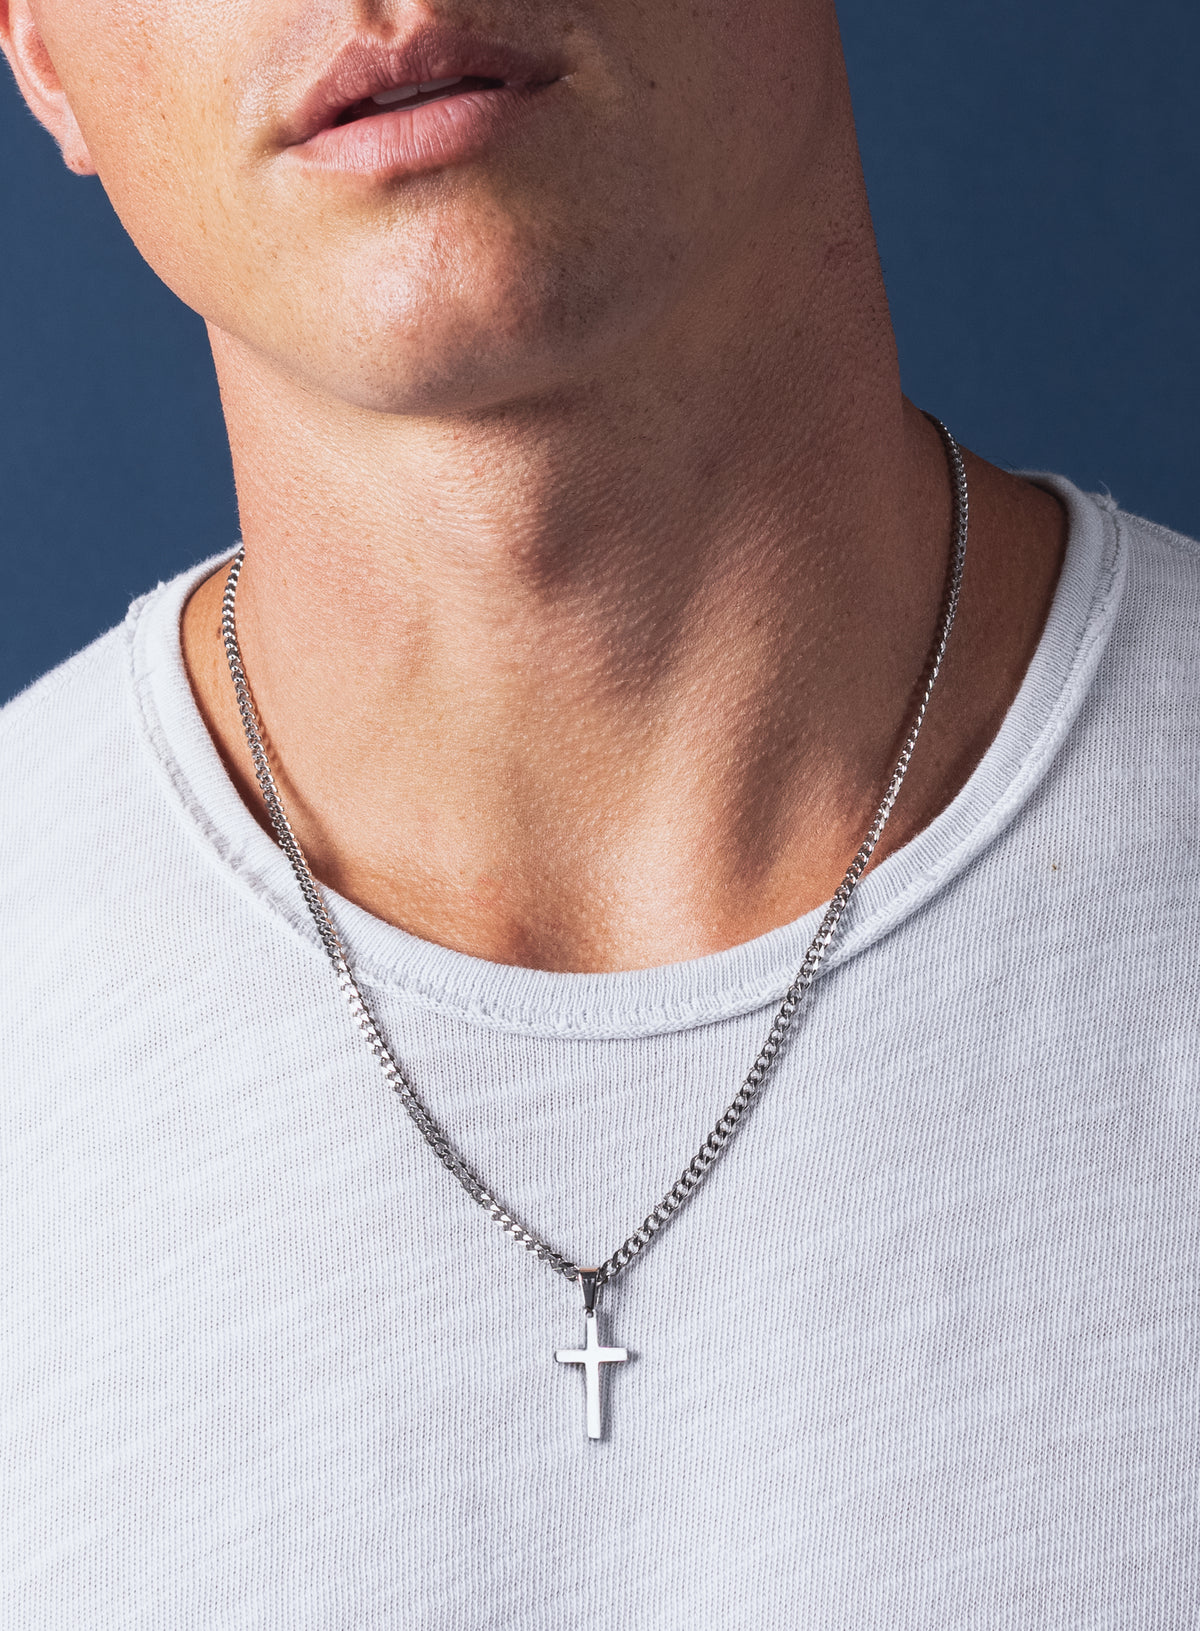 Mens Stainless Steel Small Cross Necklace, Waterproof Silver Cross Pendant, Cross  Necklace Teen Boy, Religious Gift, Catholic Jewelry, Bro - Etsy